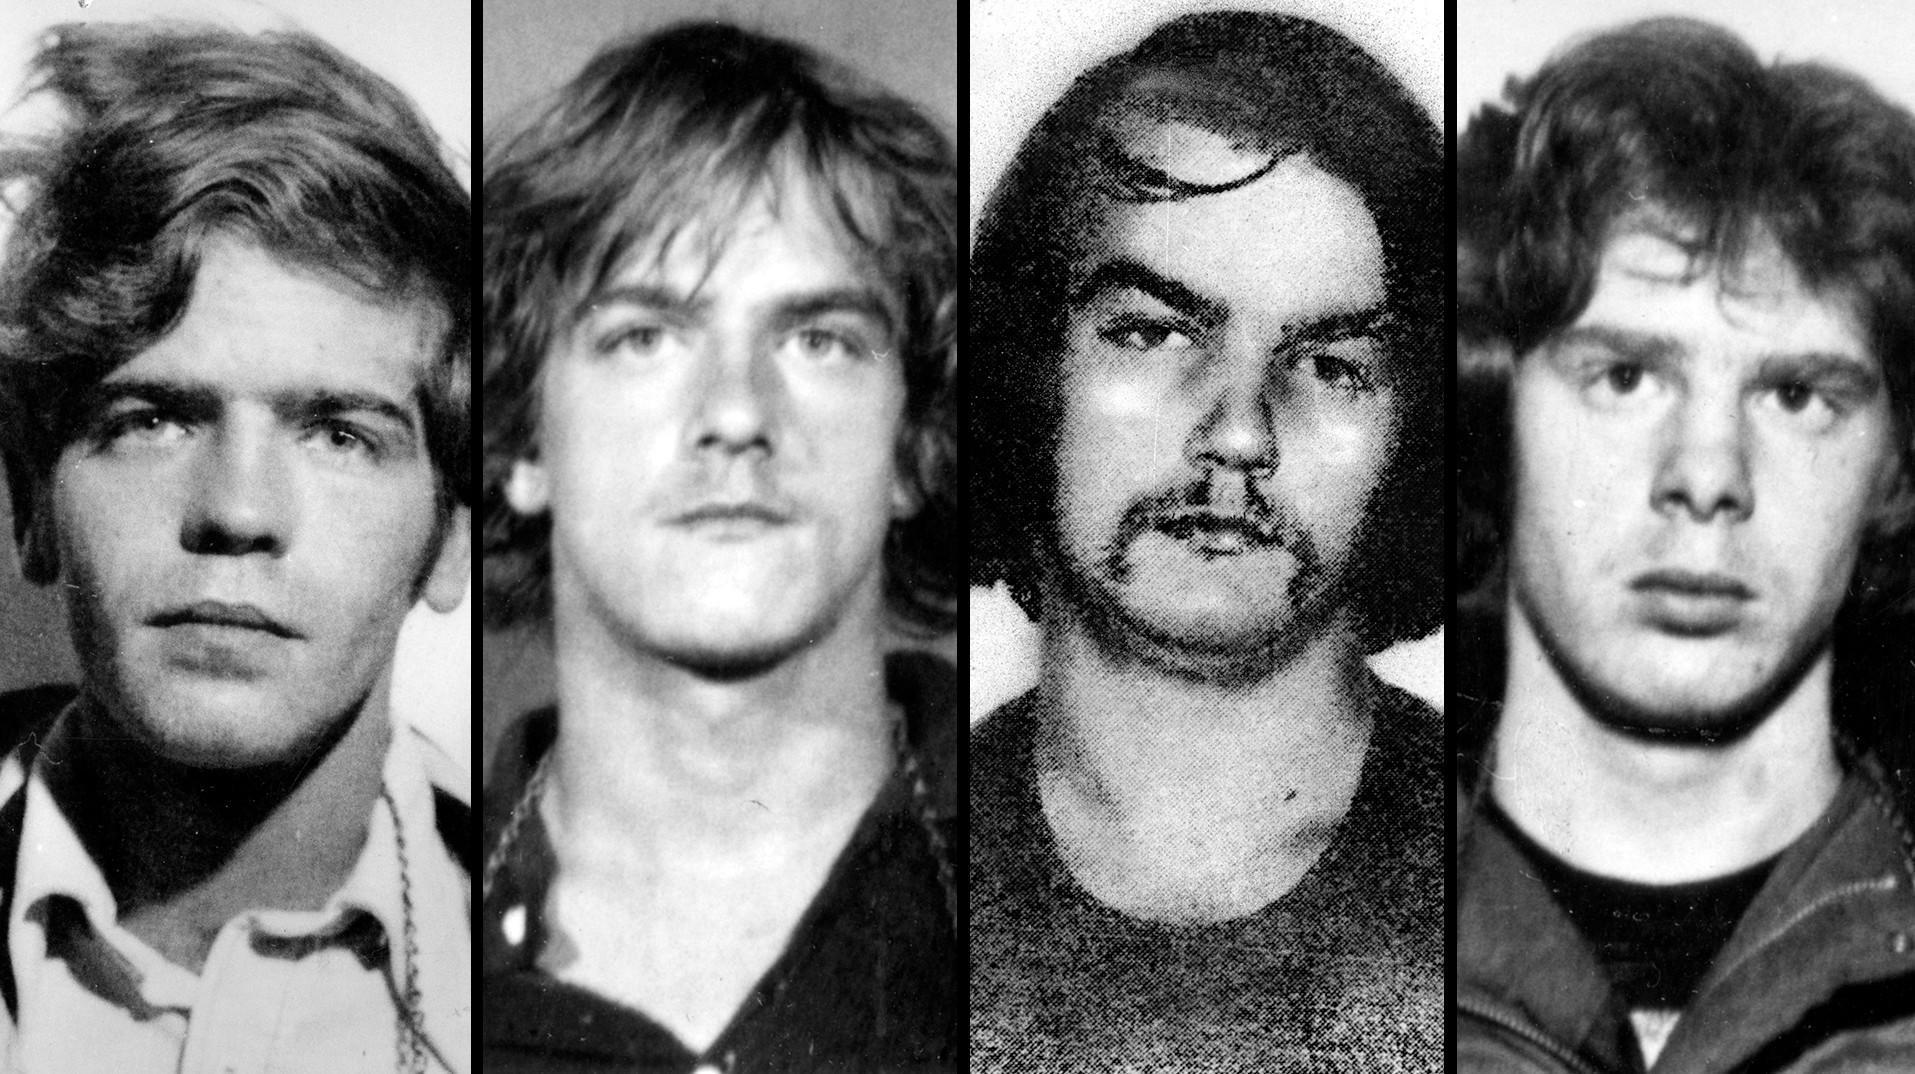 Member of savage Ripper Crew released: When a life sentence doesn't.